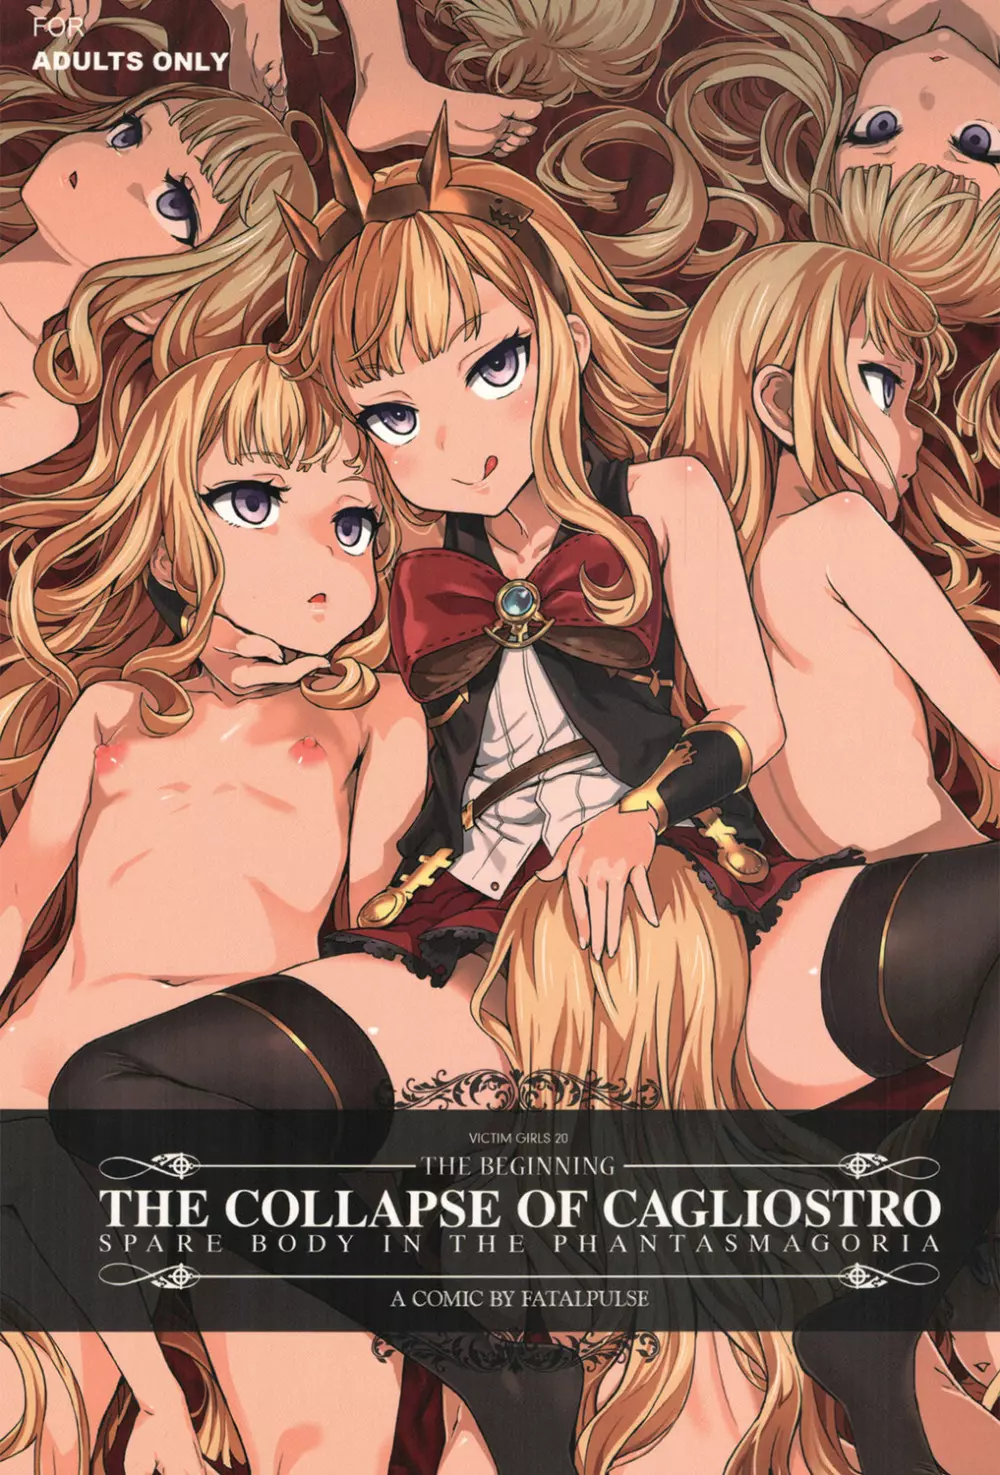 VictimGirls20 THE COLLAPSE OF CAGLIOSTRO - page1